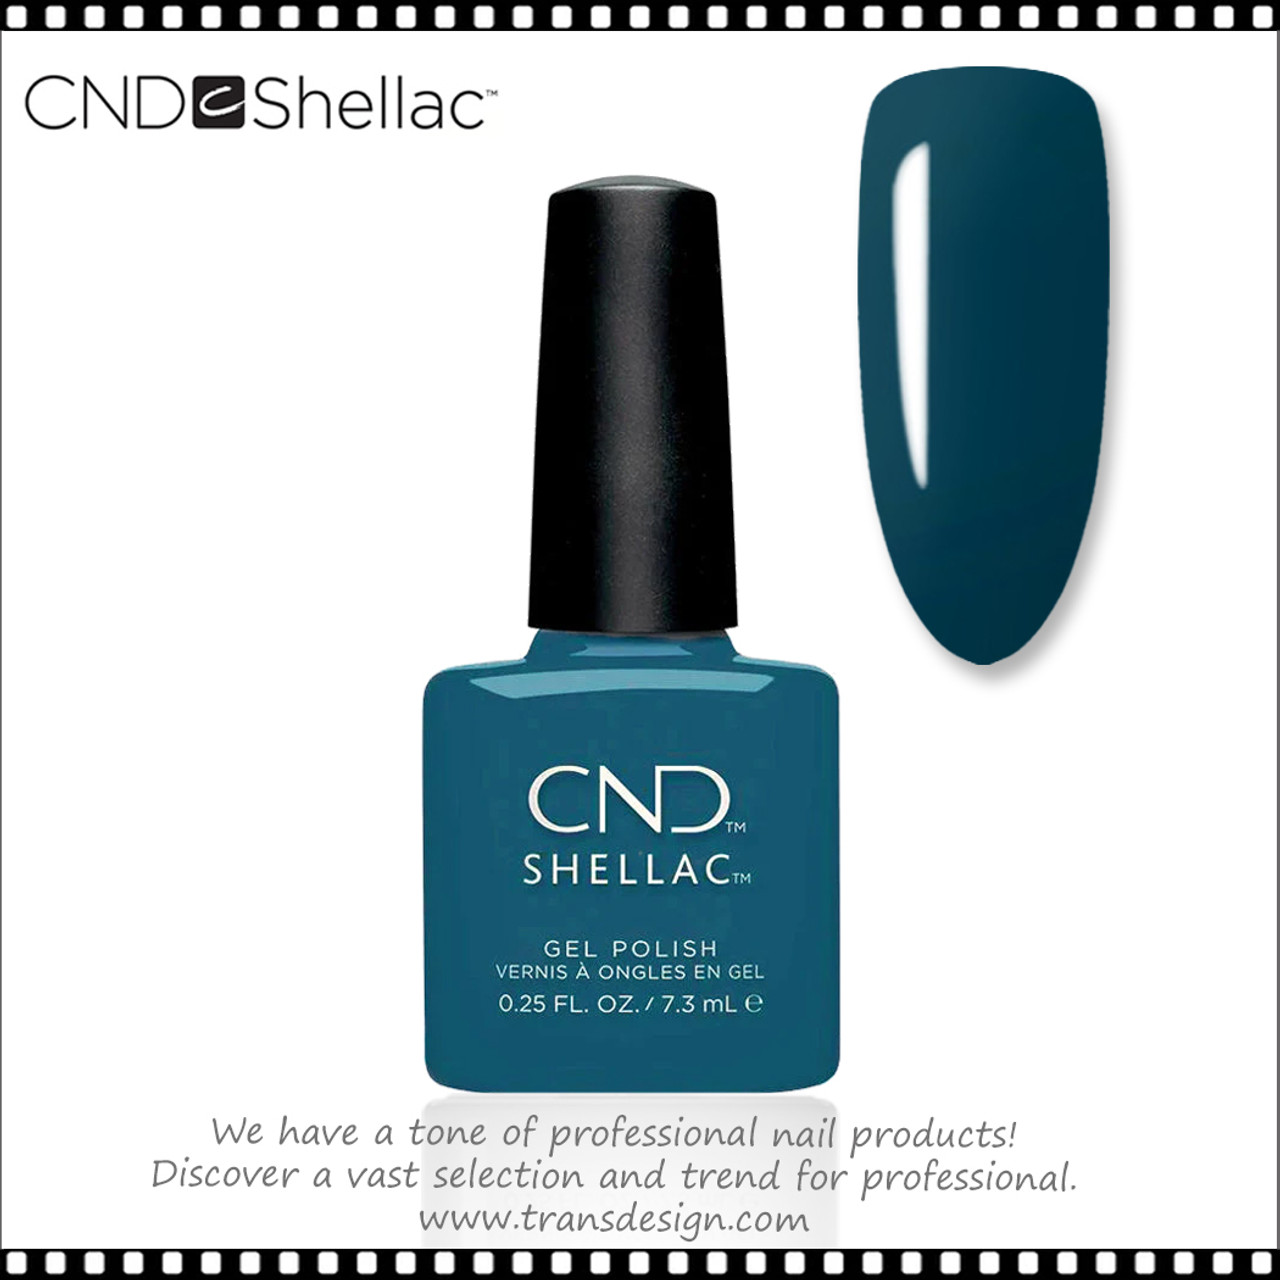 01205 CND SHELLAC Teal Time 21202.1704871938